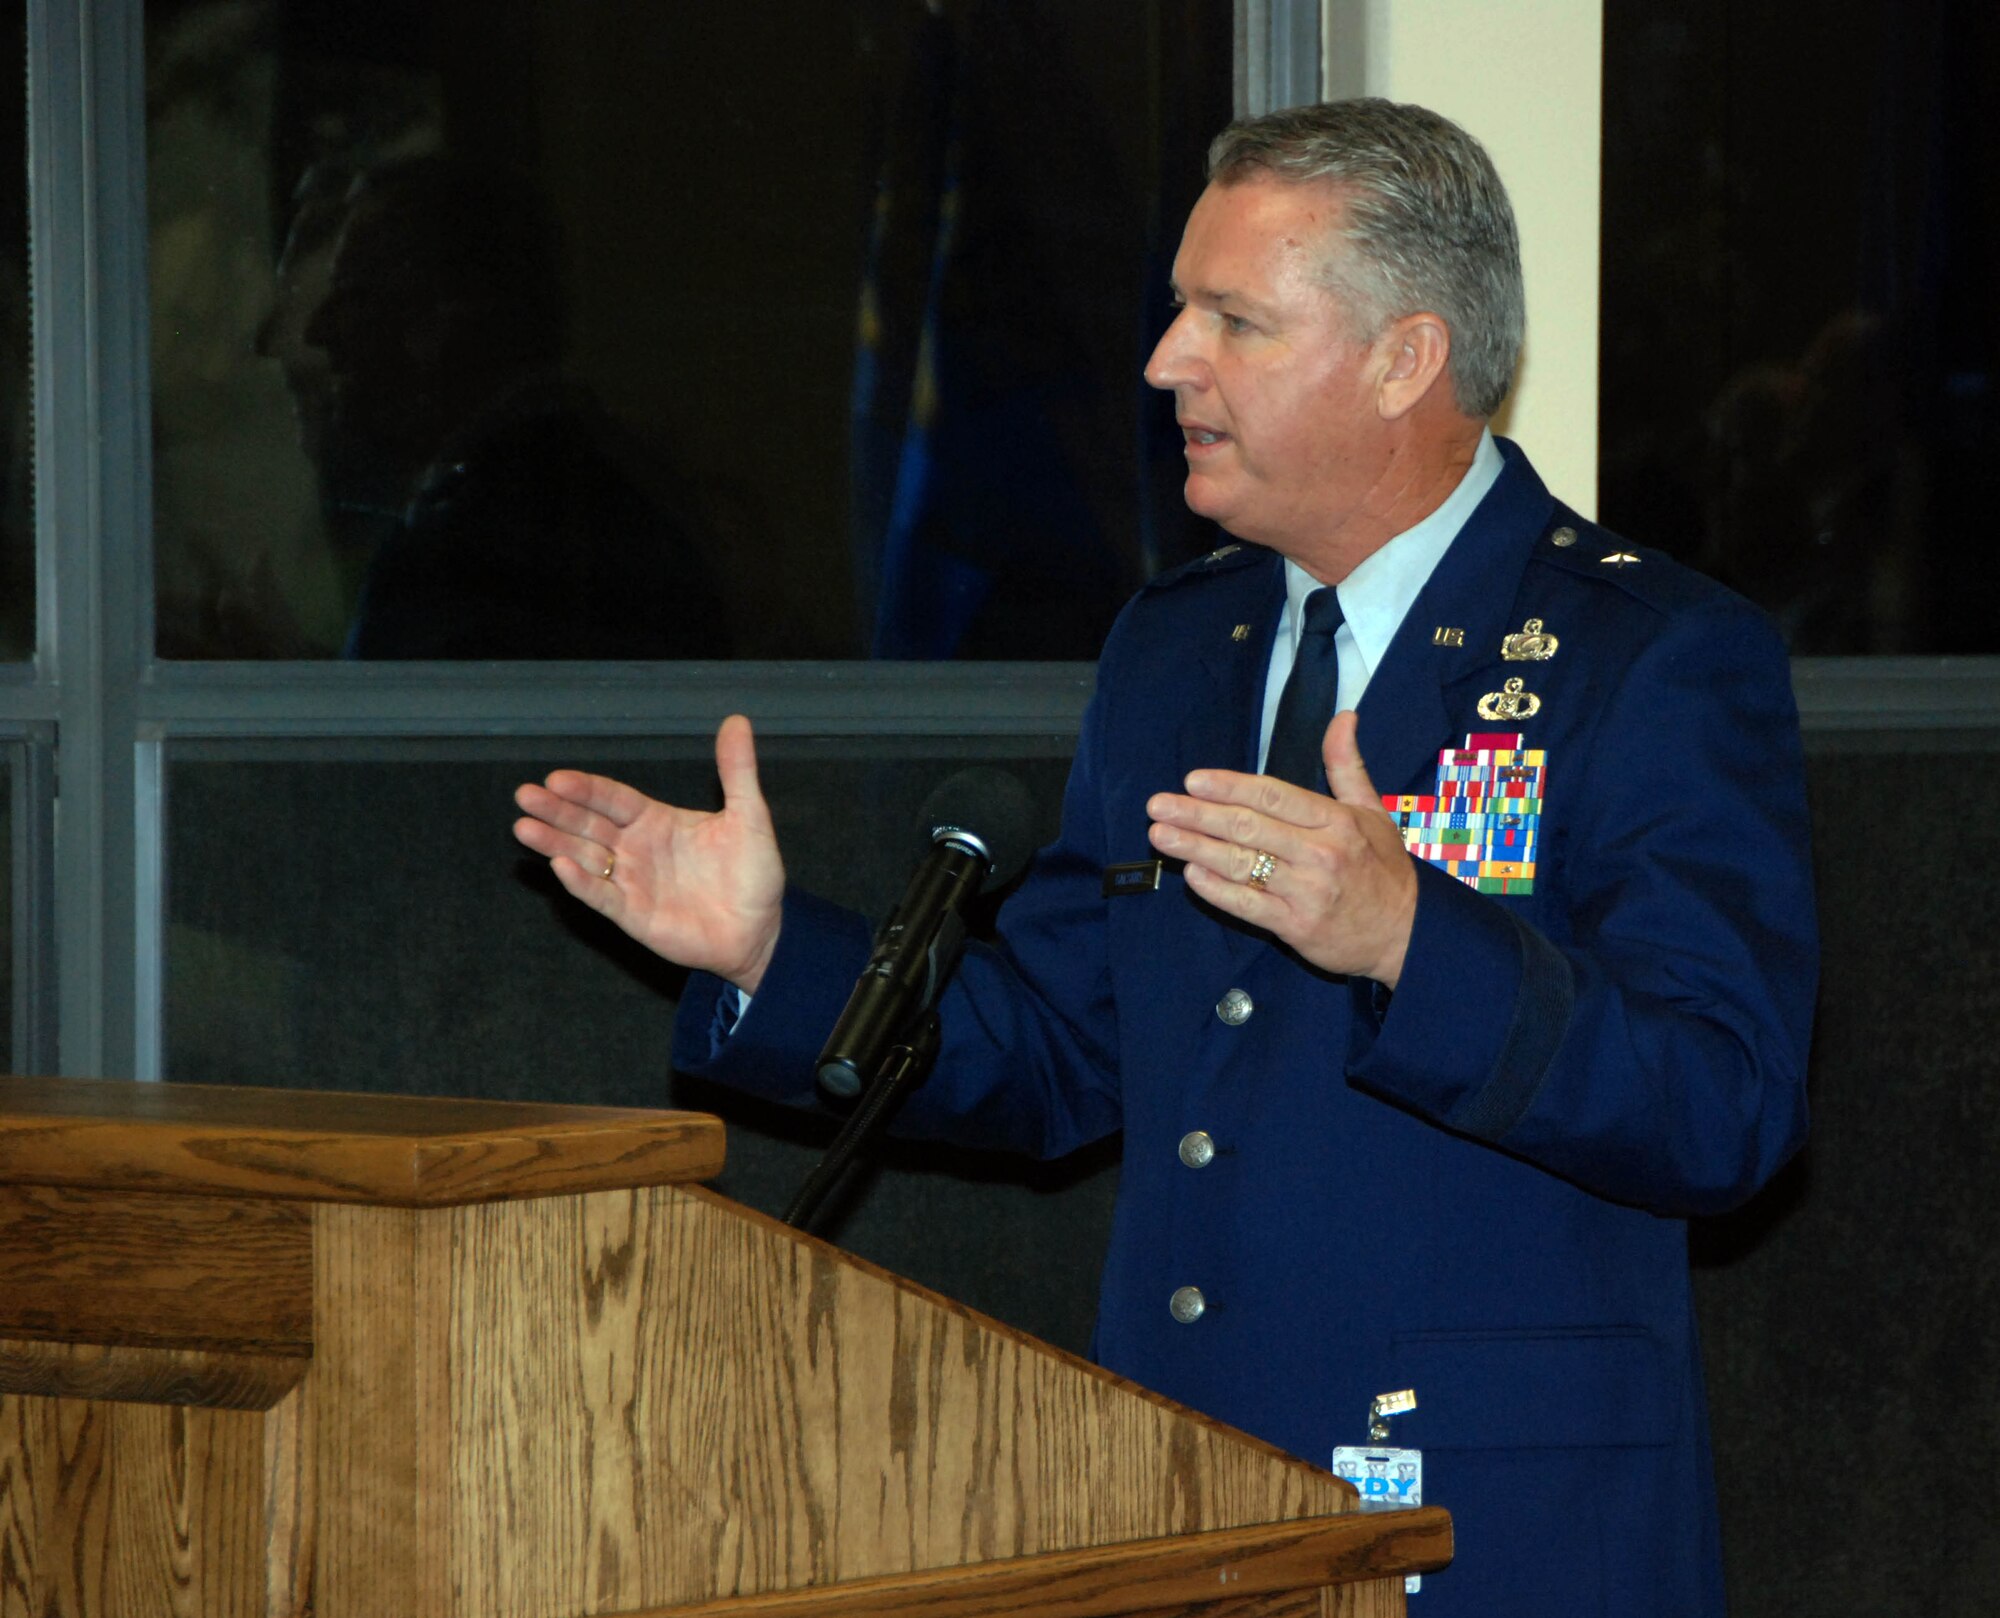 Brig. Gen. Joseph Balskus, Florida's Assistant Adjutant General and Florida Air National Guard commander, gives remarks during the activation ceremony of the 101st Air & Space Operations Group at Tyndall Air Force Base, Fla., Aug. 21, 2010.  (U.S. Air Force photo by Capt. Jared Scott)